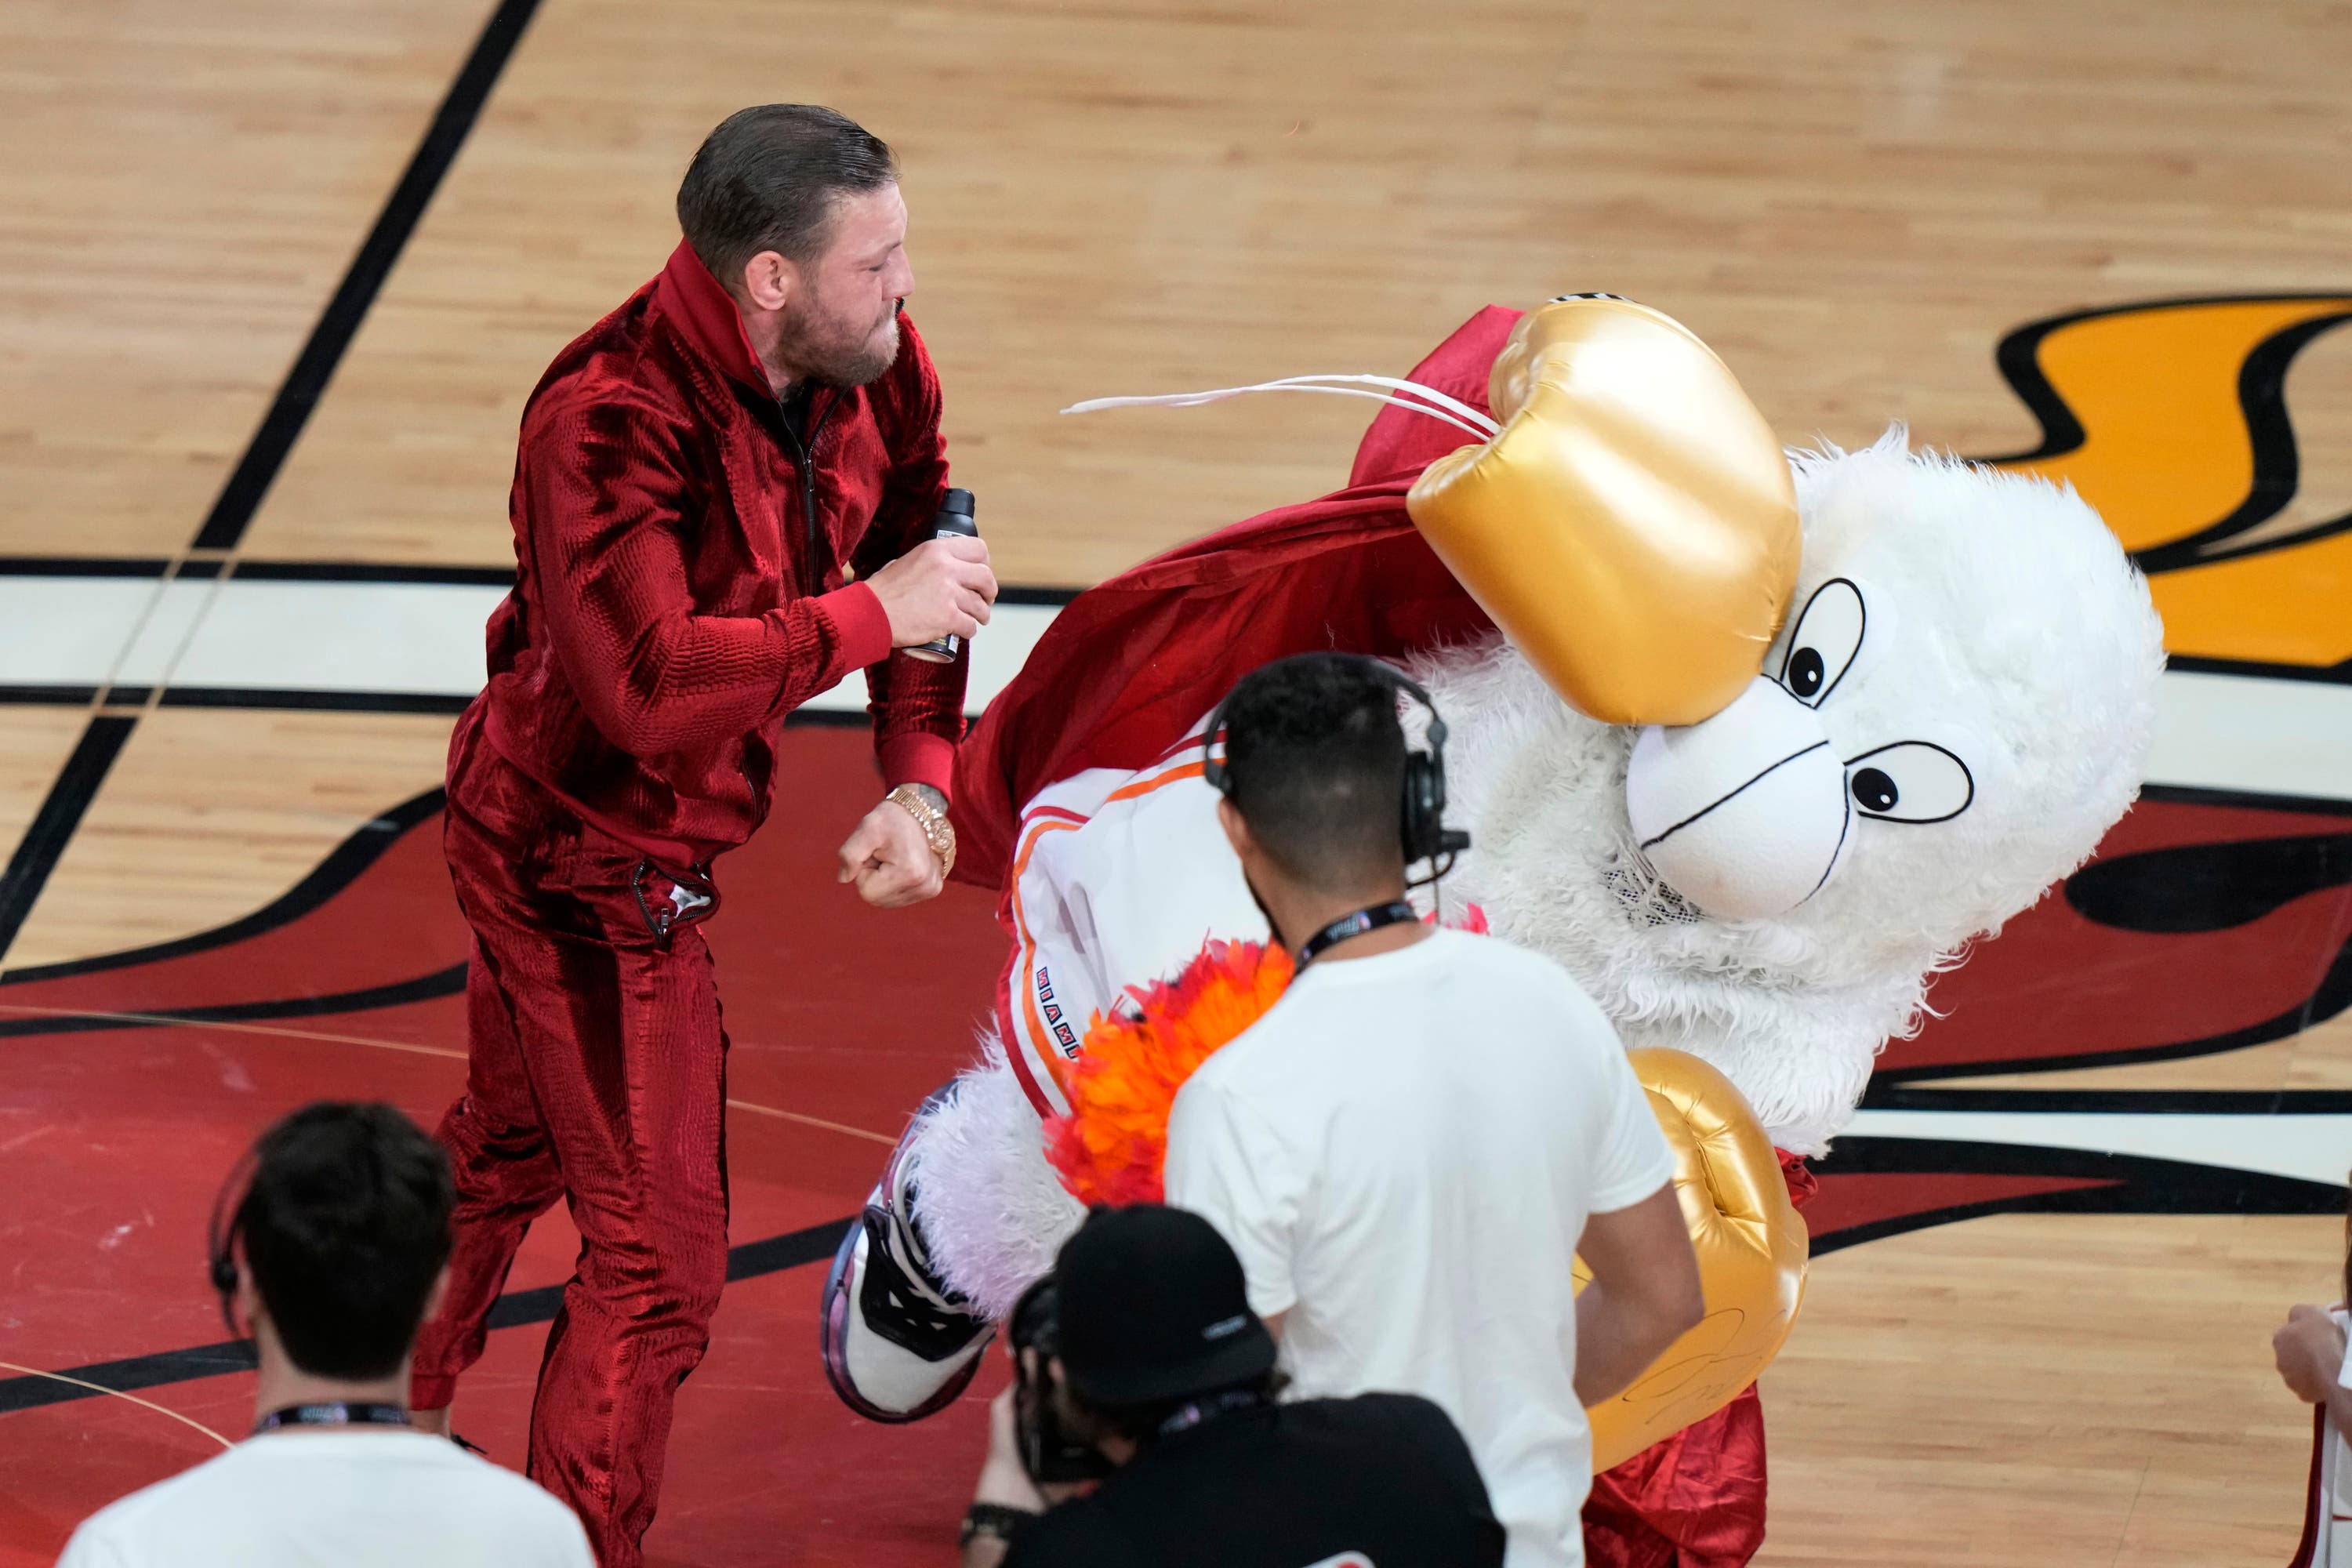 Former MMA fighter Conor McGregor punches Burnie, the Miami Heat mascot, during a break in Game 4 of the NBA Finals against the Denver Nuggets.